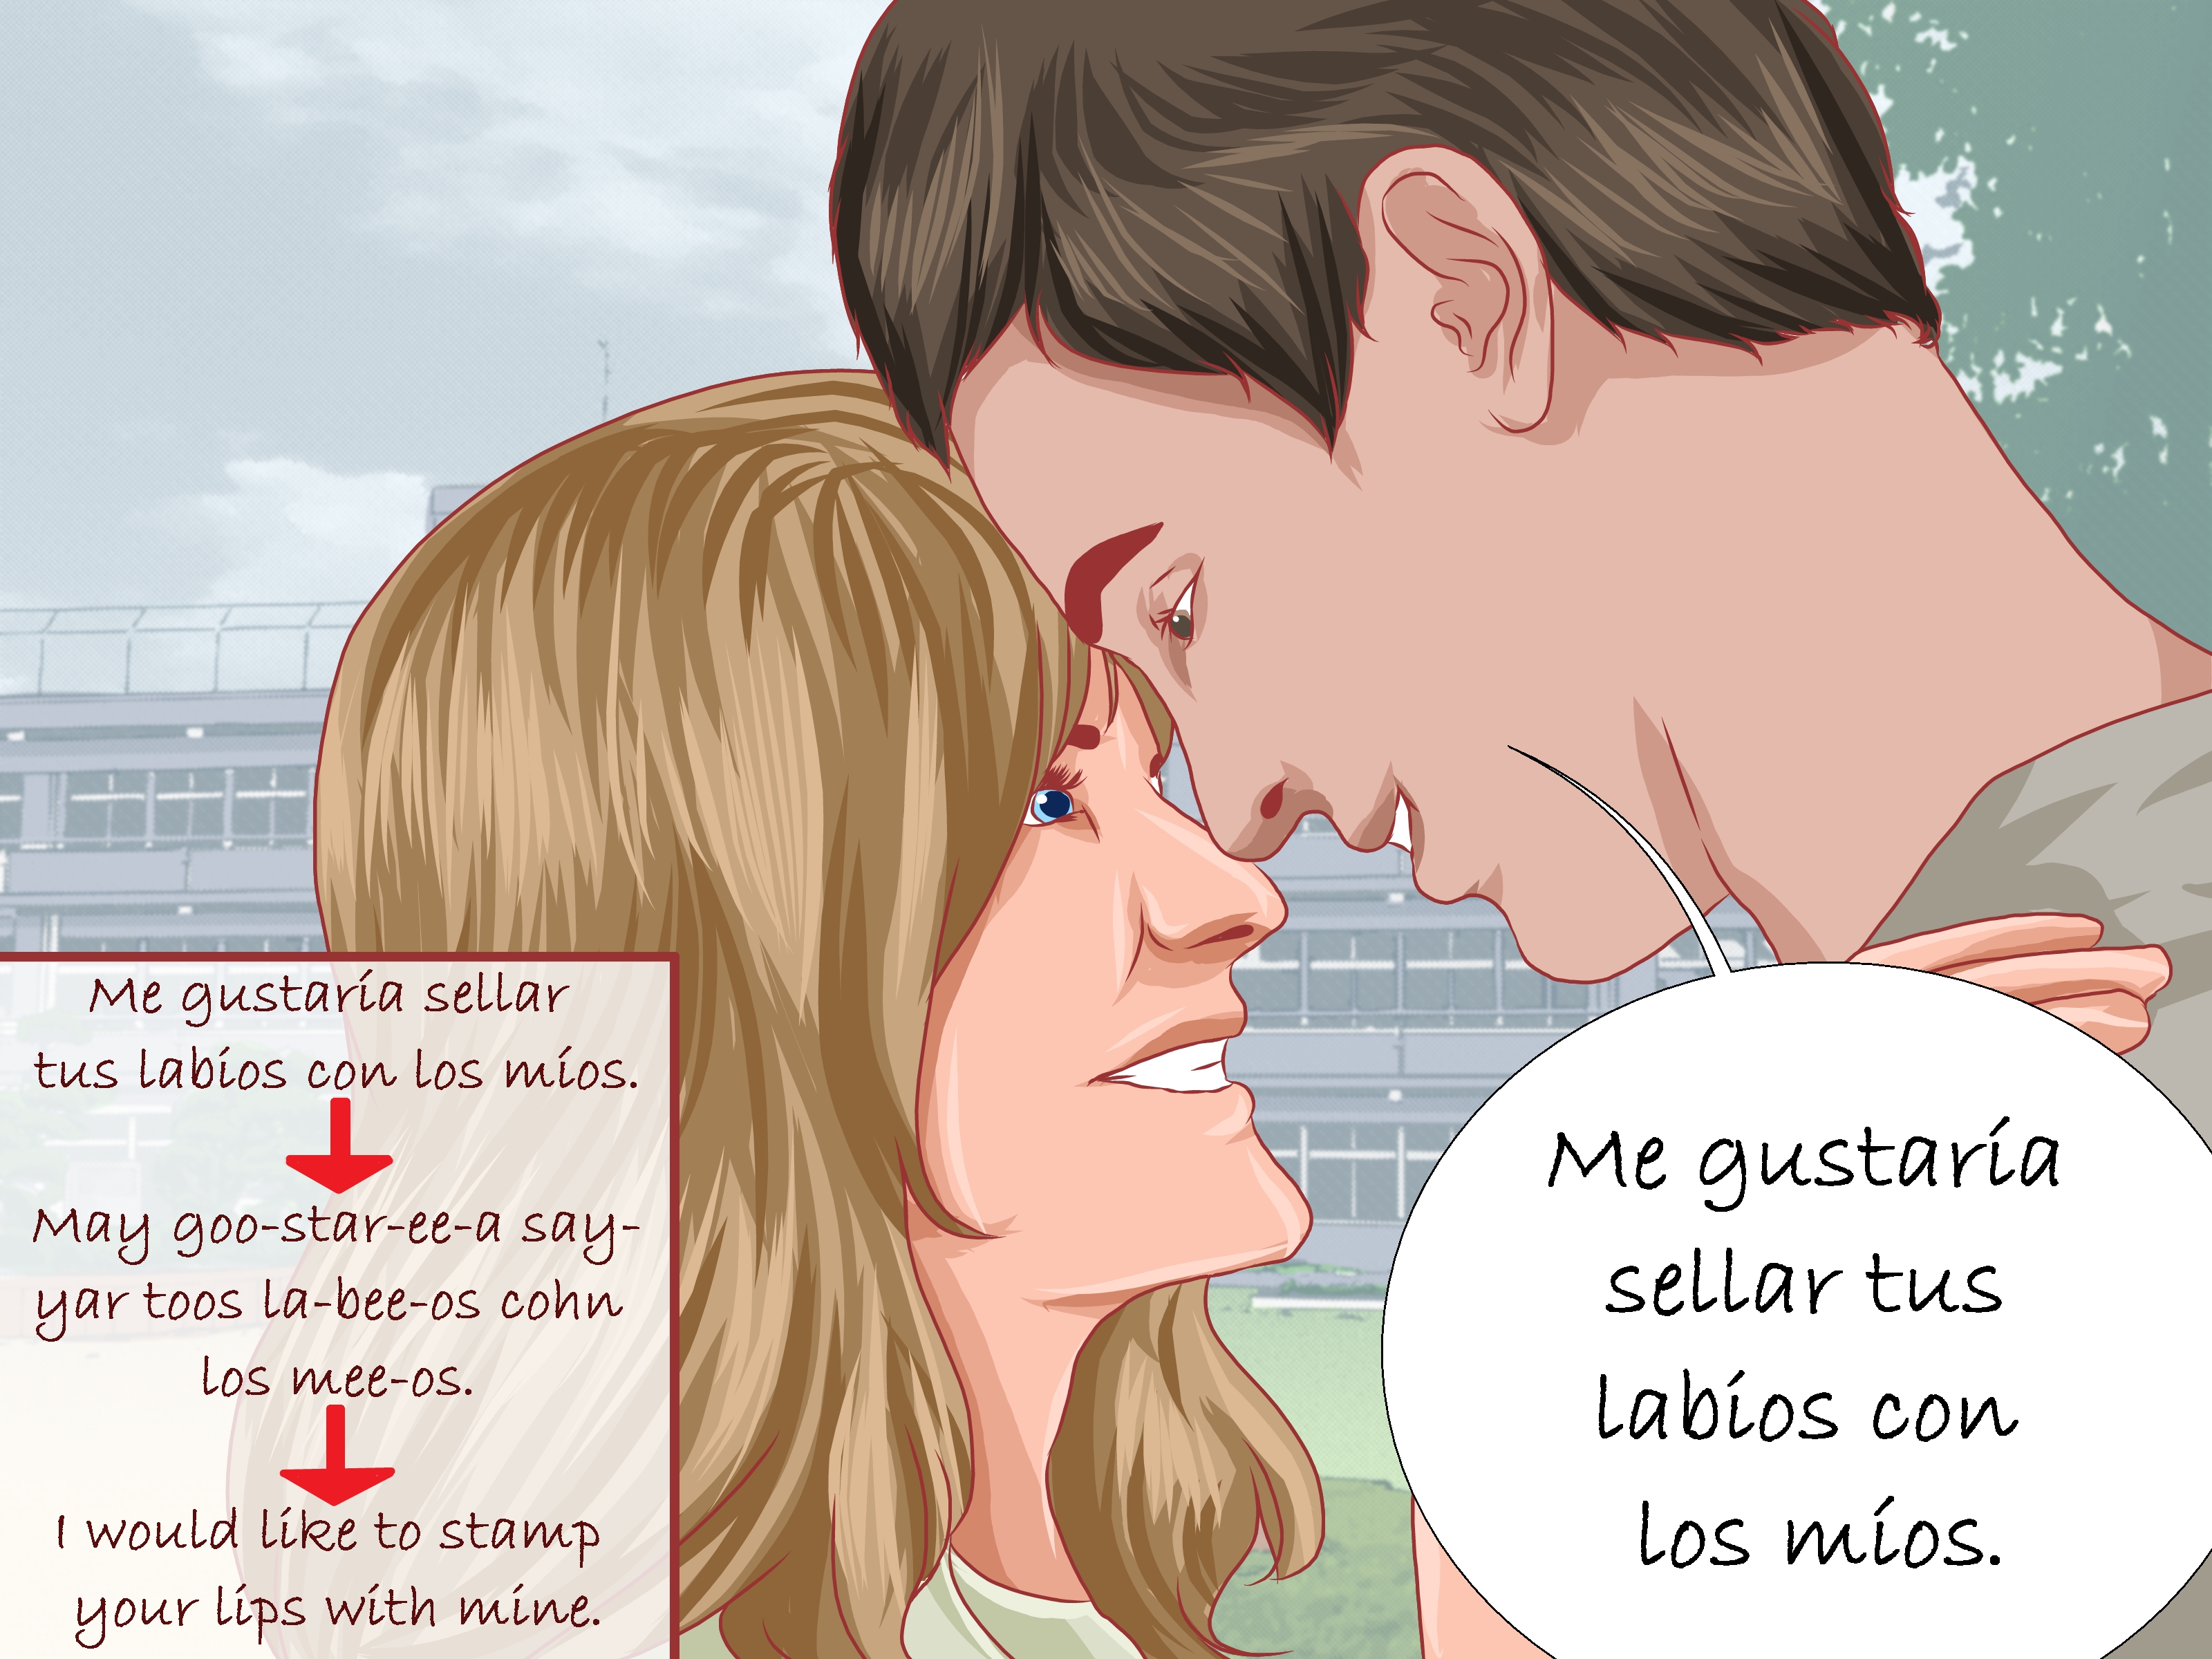 Image Titled Say I Want To Kiss You In Spanish Step - Want To Kiss You In Spanish - HD Wallpaper 